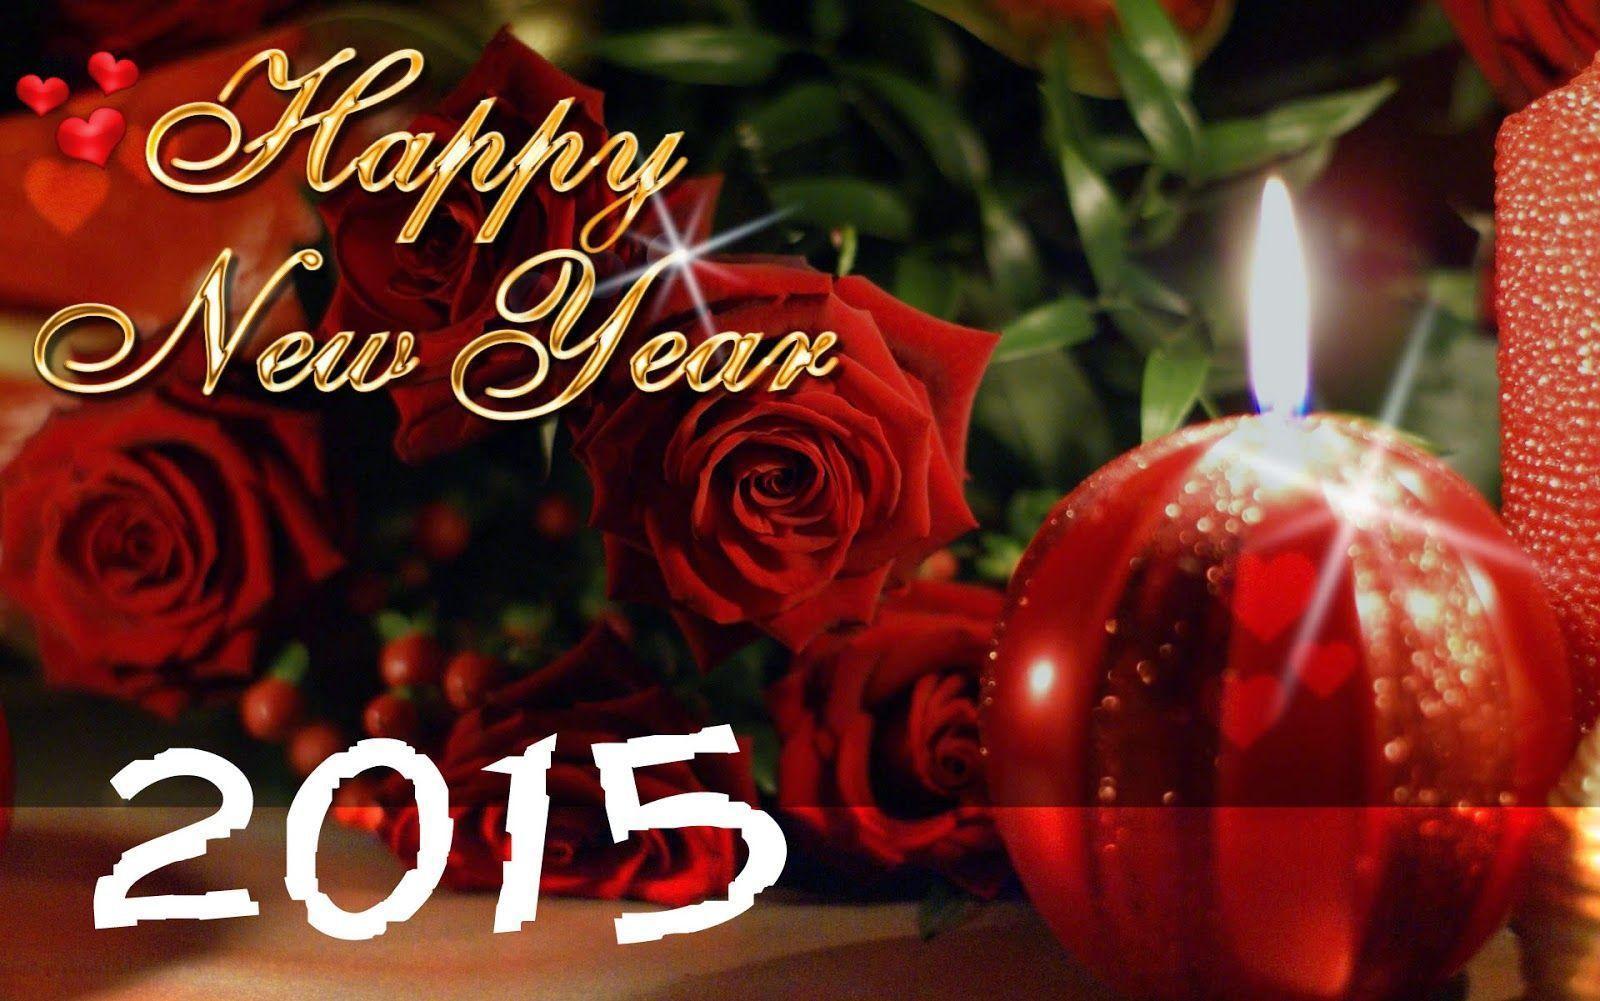 Happy New Year 2015 Wishes 2. Quotesvsfun